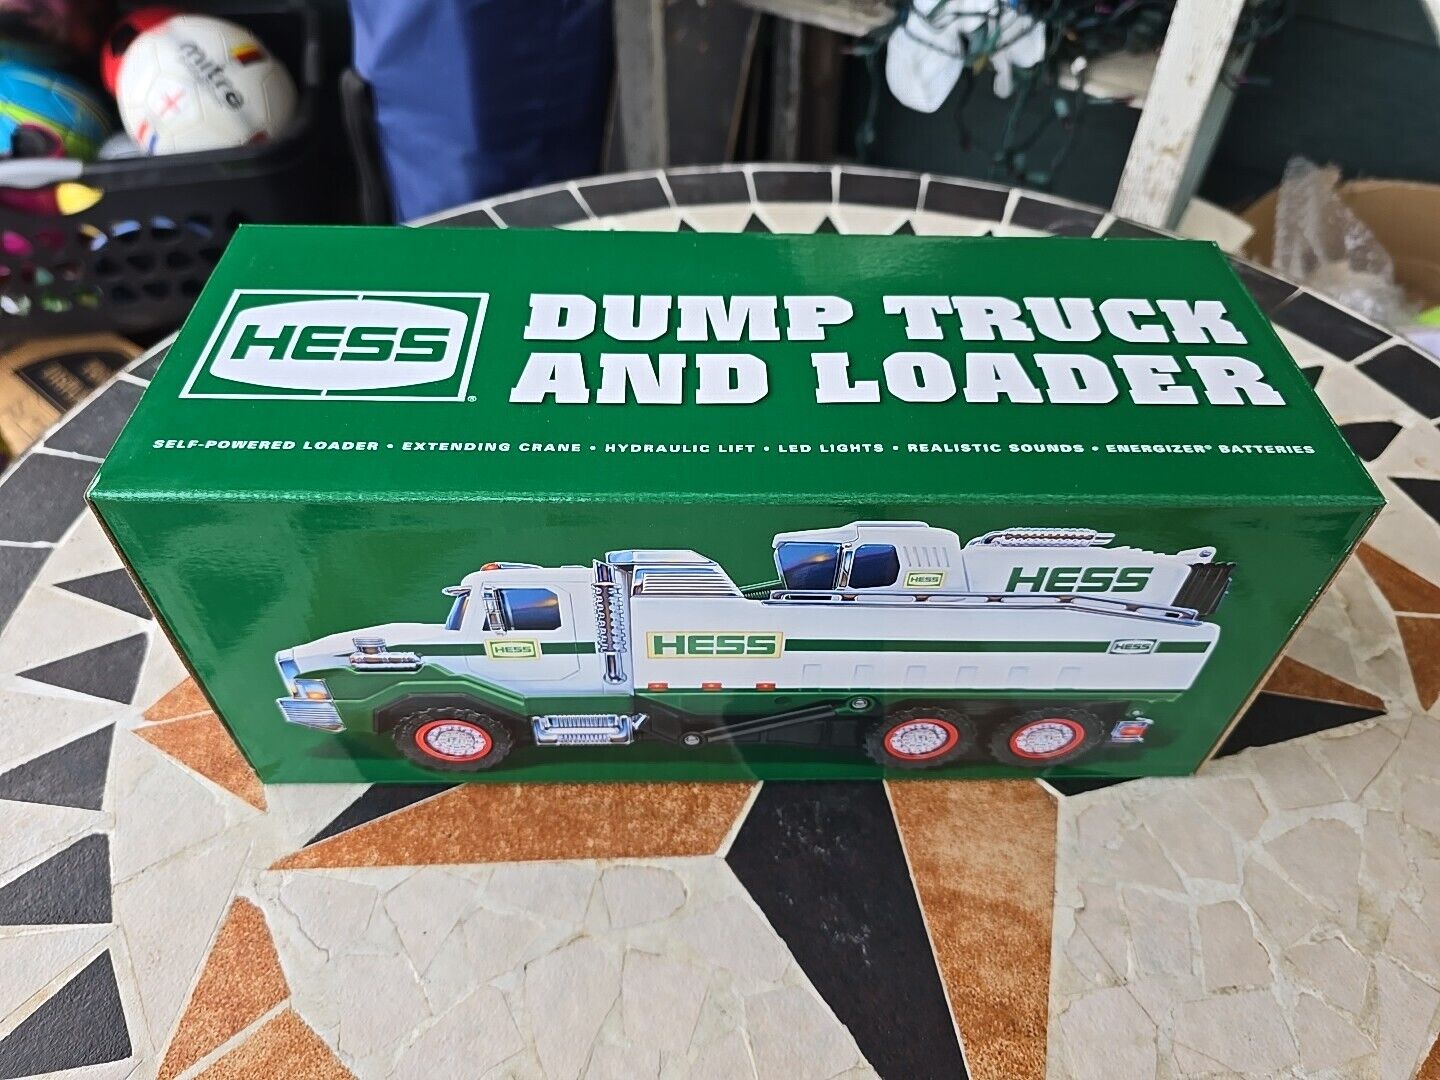 Hess Dump Truck and Loader 2017 New In Box.